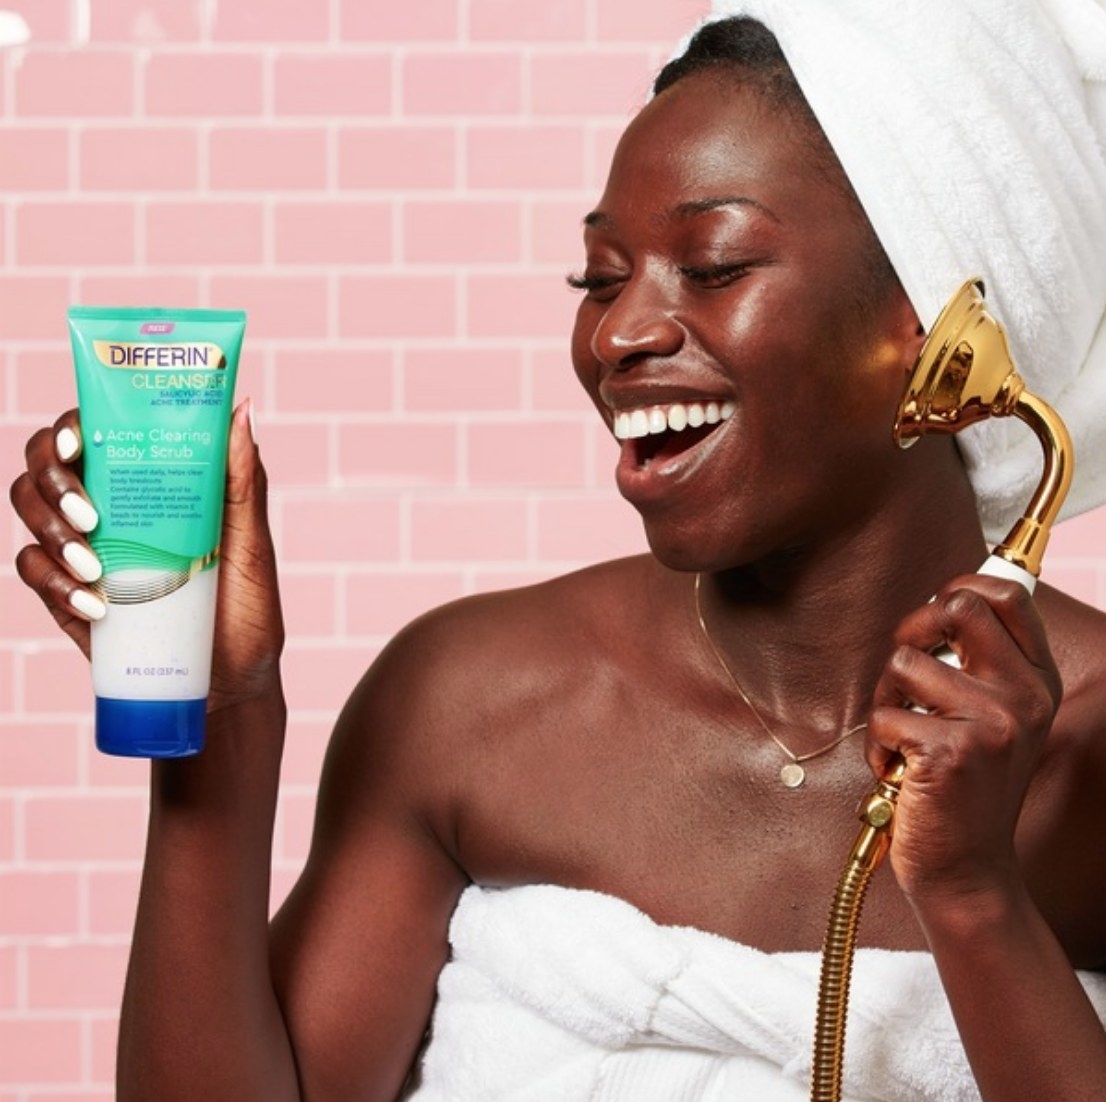 A model holding a bottle of acne-clearing body scrub in the shower